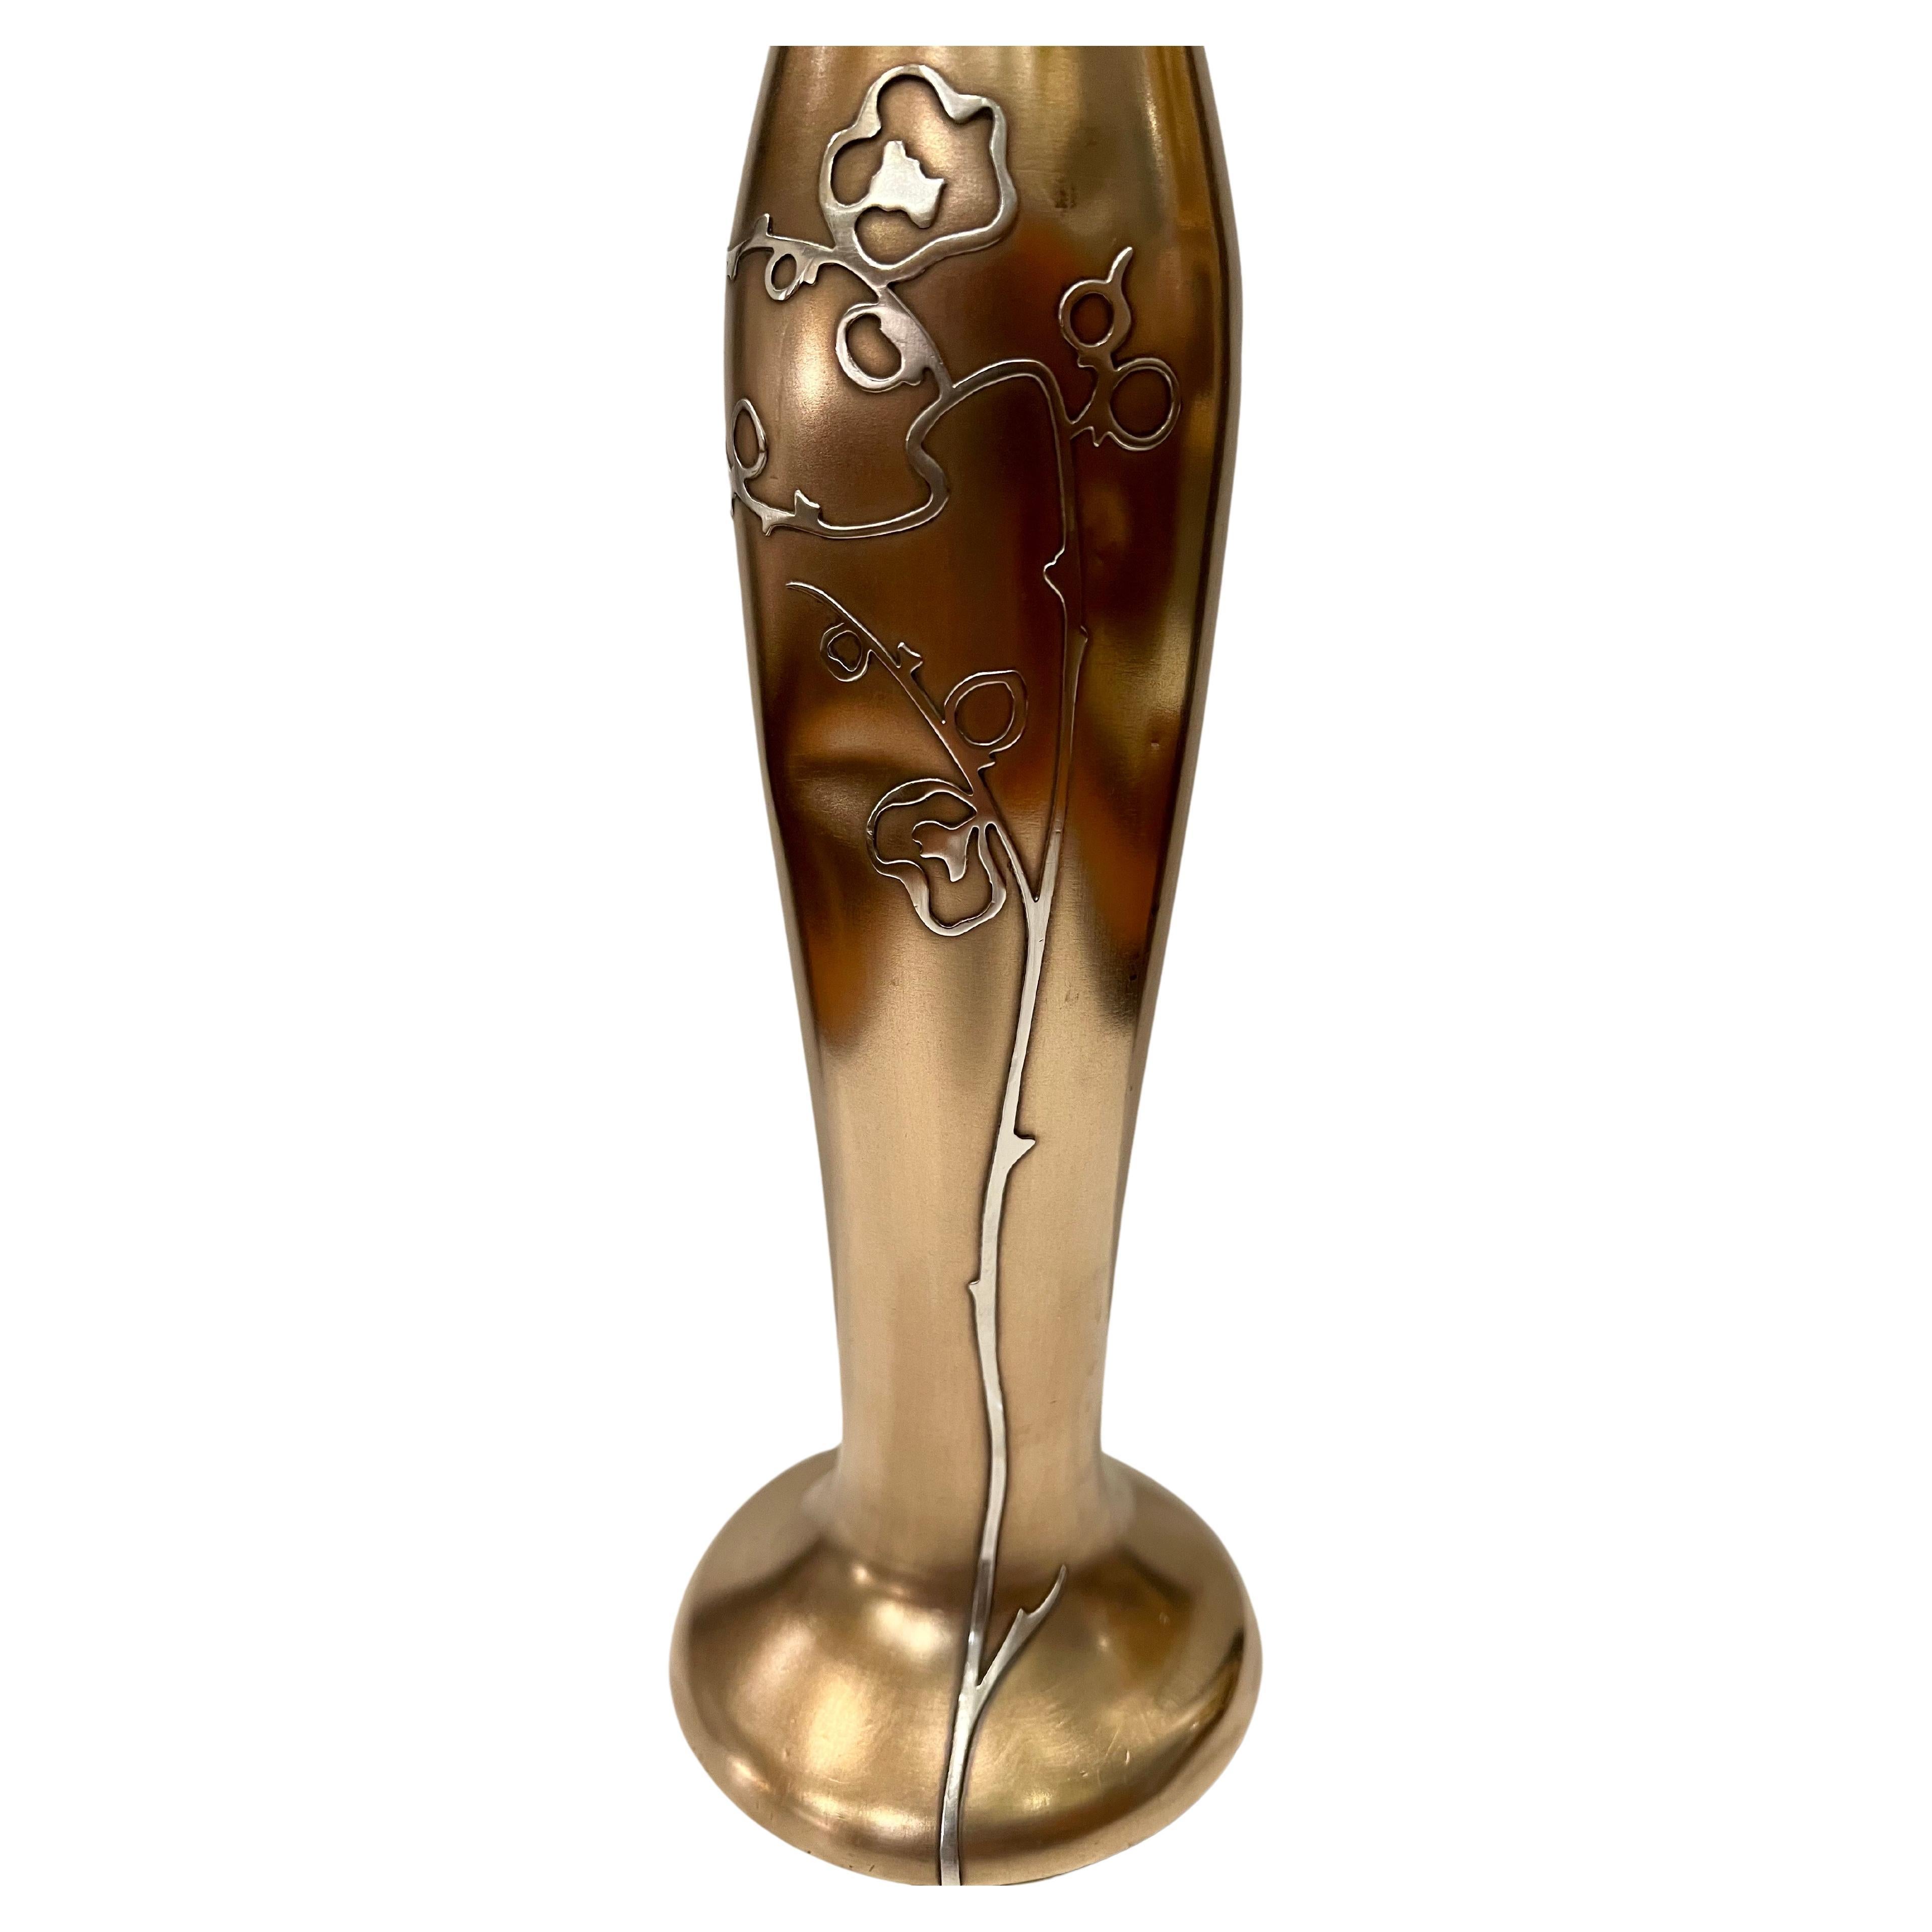 American Art Nouveau Bronze and Sterling Silver Overlay Rare Vase by Otto Heintz For Sale